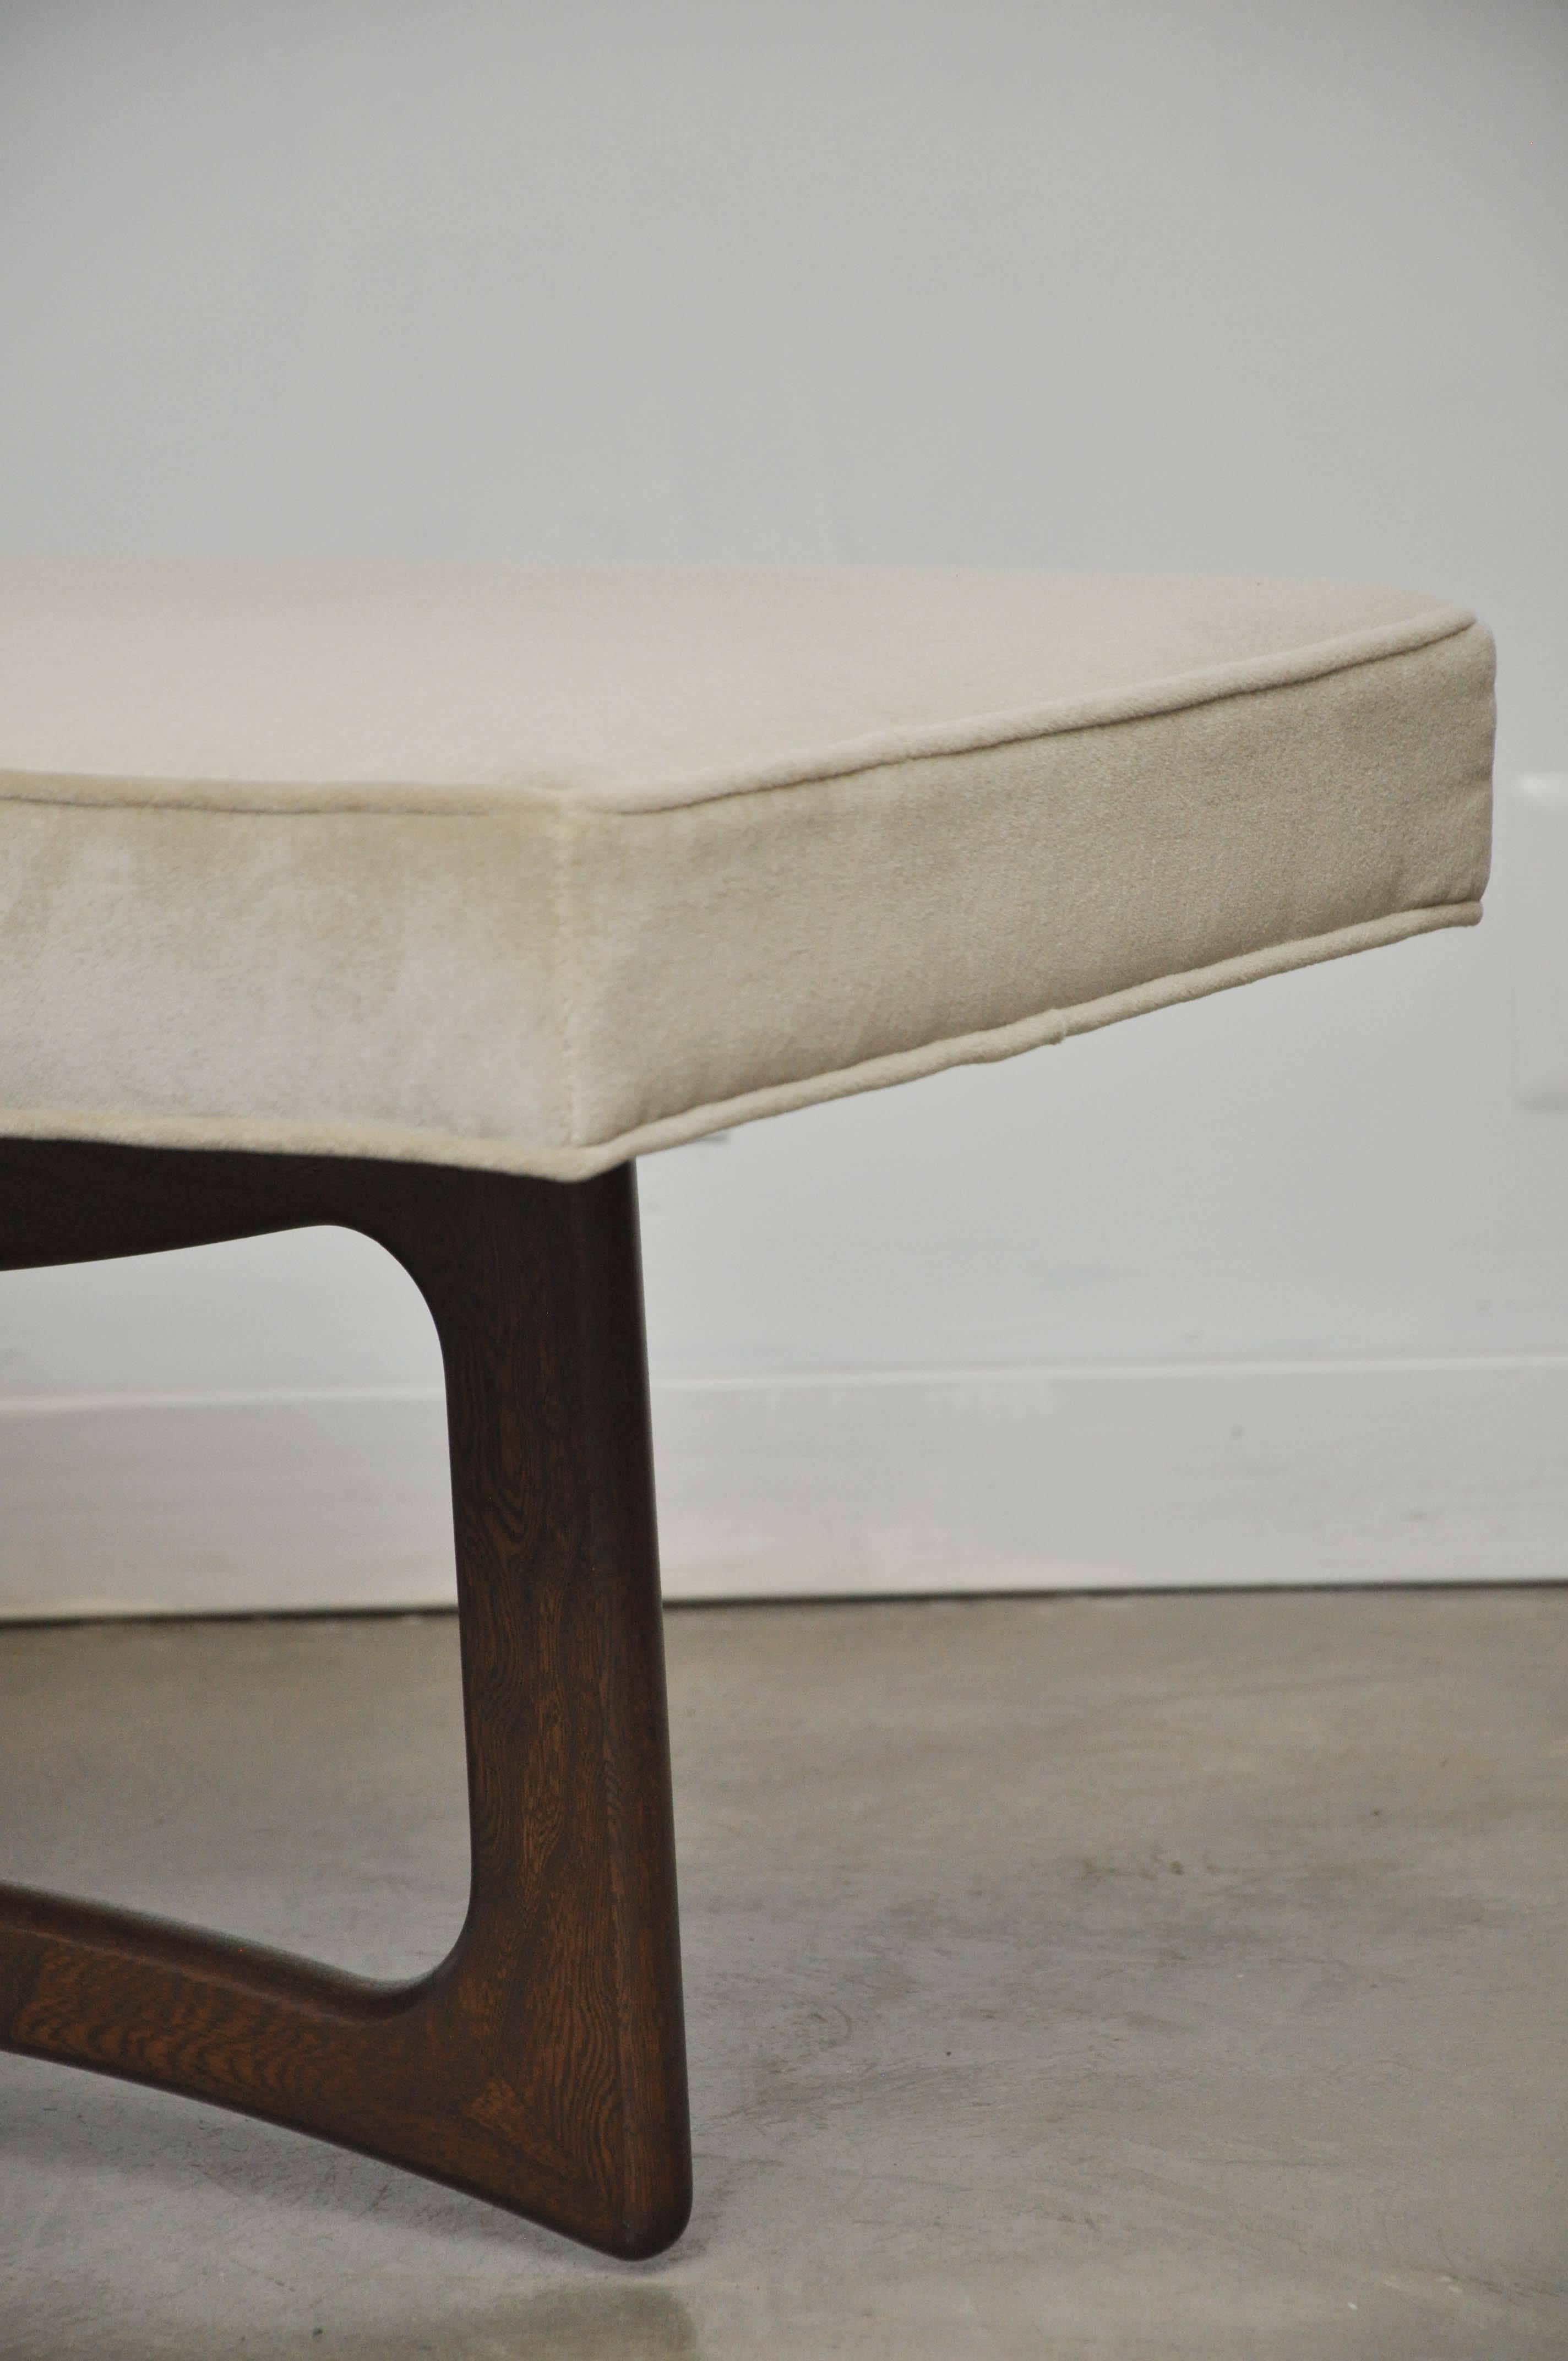 American Mid-Century Sculptural Walnut Bench with Cream Upholstery